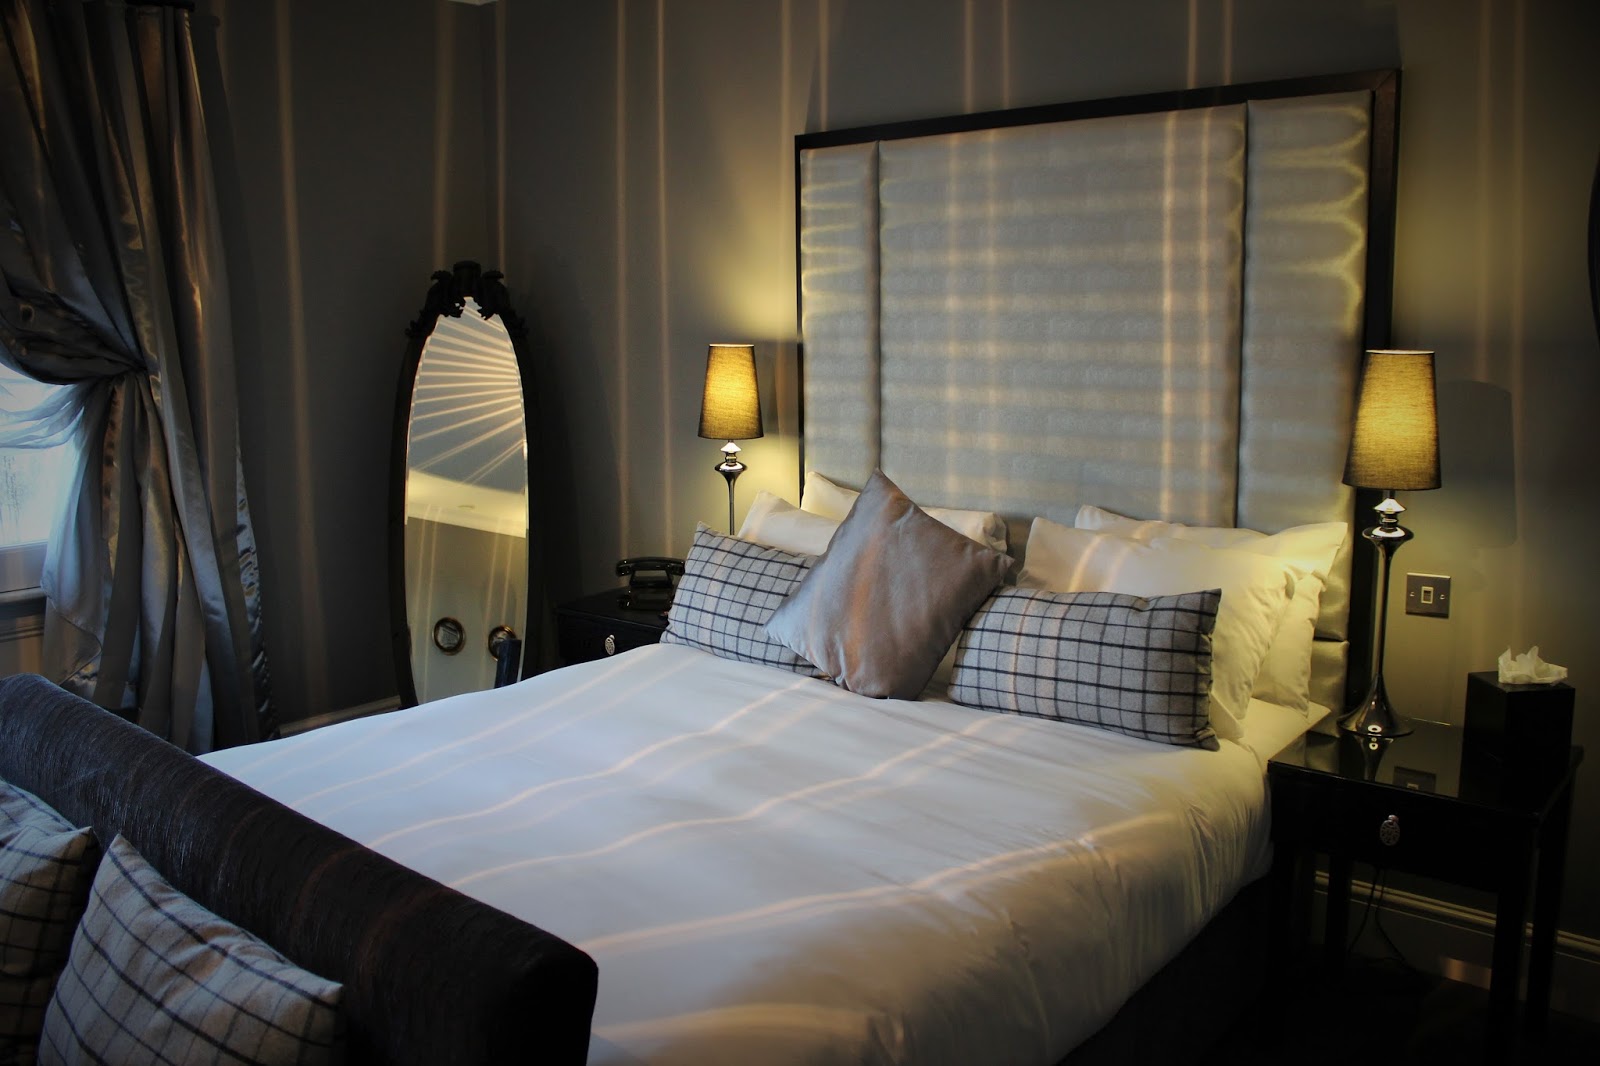 Poets House Hotel, Ely, Cambridgeshire - Rooms